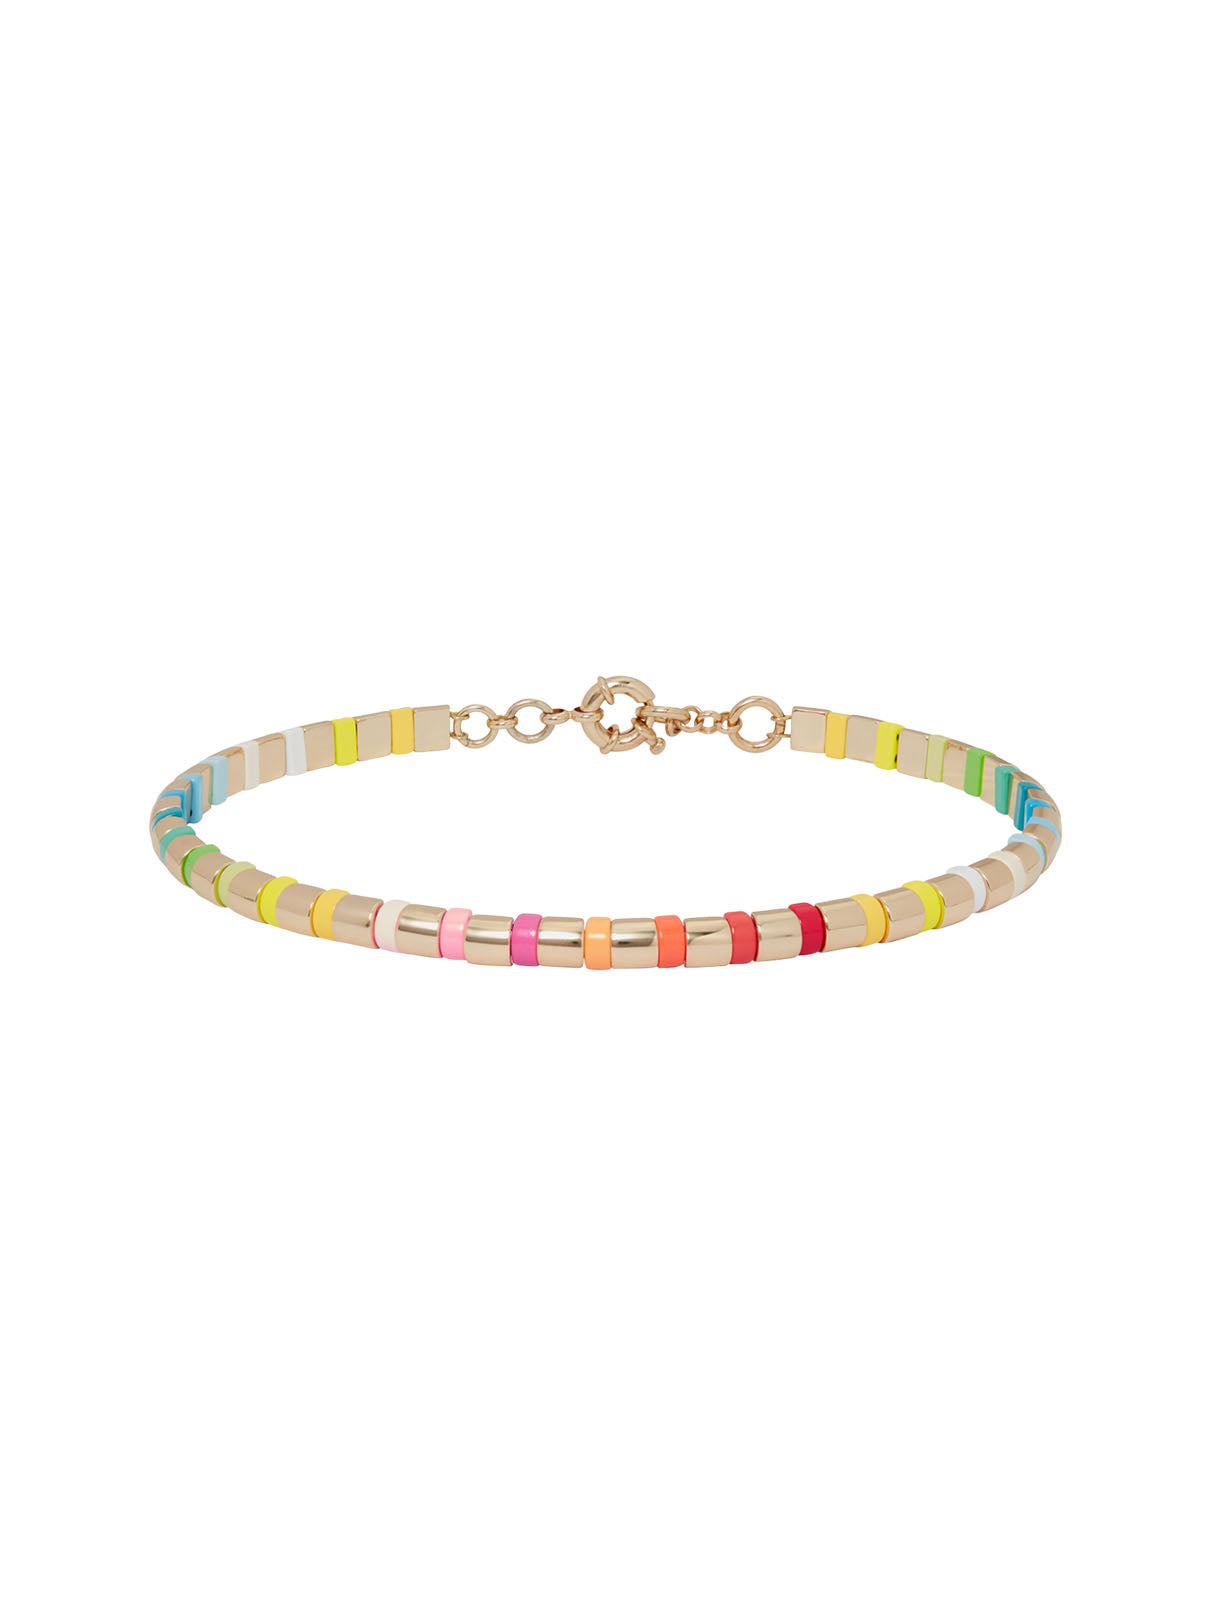 Not Just Another Rainbow Brite Choker